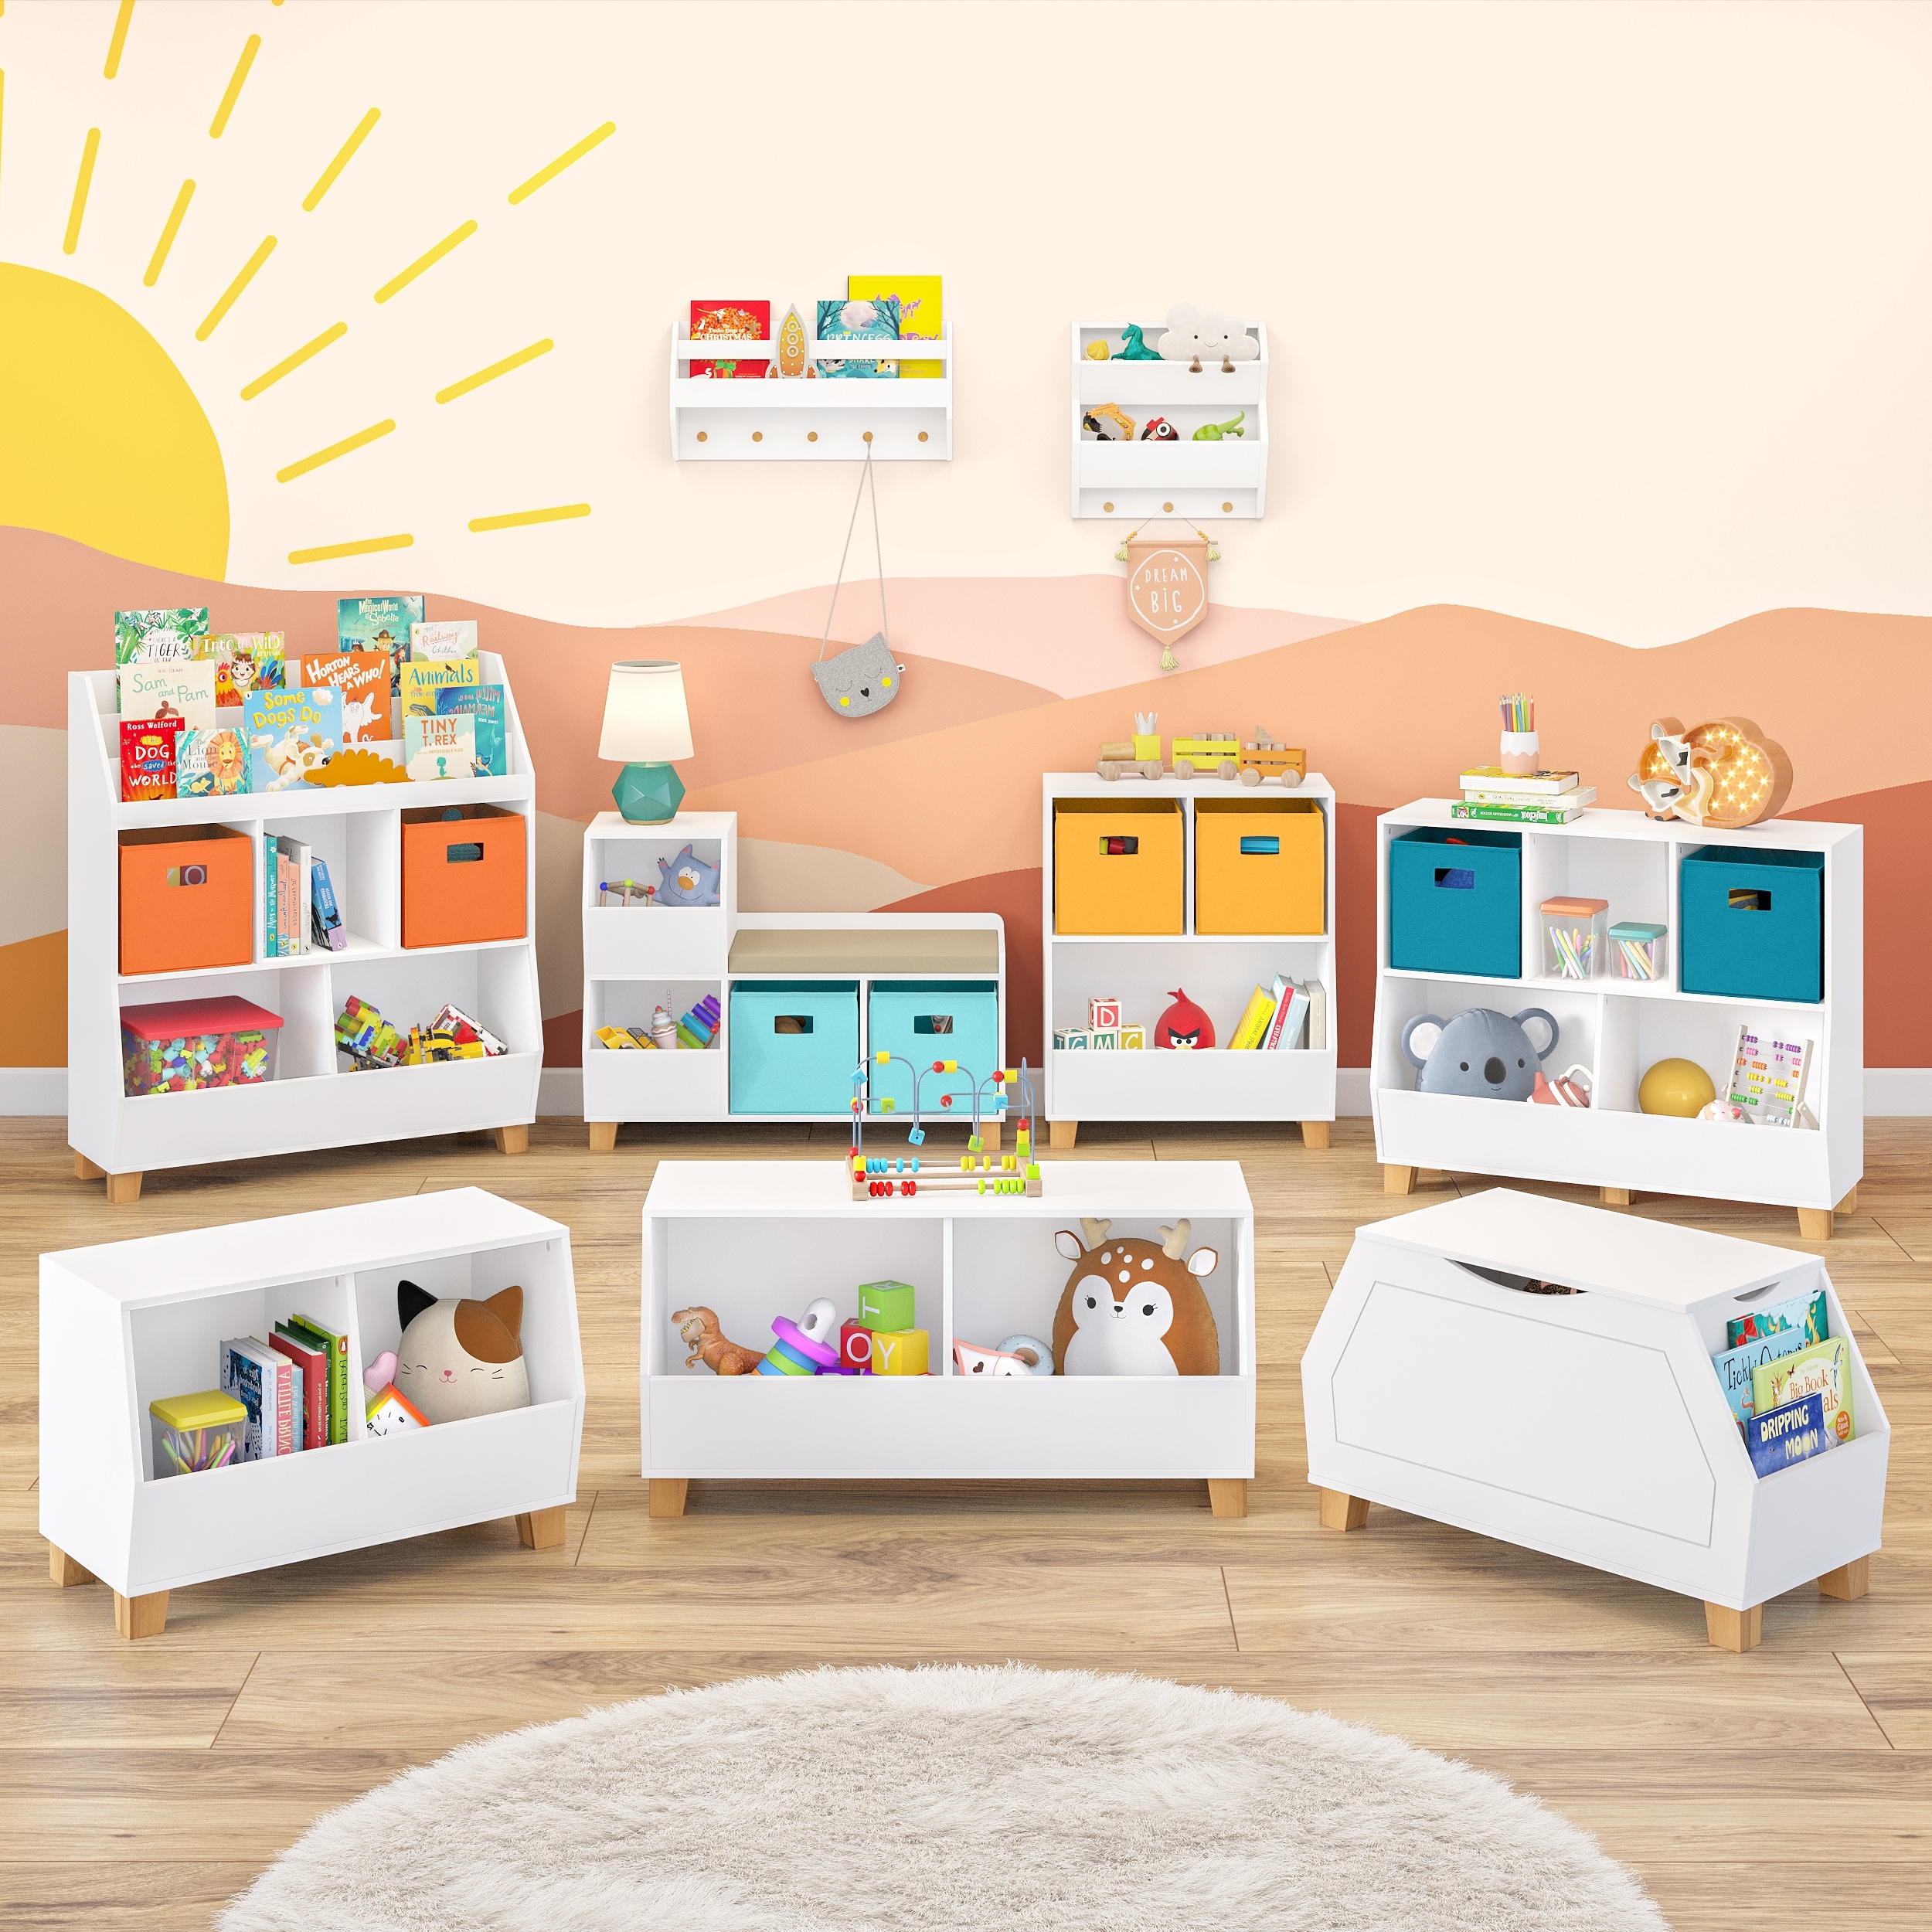 https://ak1.ostkcdn.com/images/products/is/images/direct/1339444346f54da87e8956f10c536e504c2e1a27/Kids-Catch-All-Wall-Shelf-with-Bookrack-and-Hooks-White.jpg